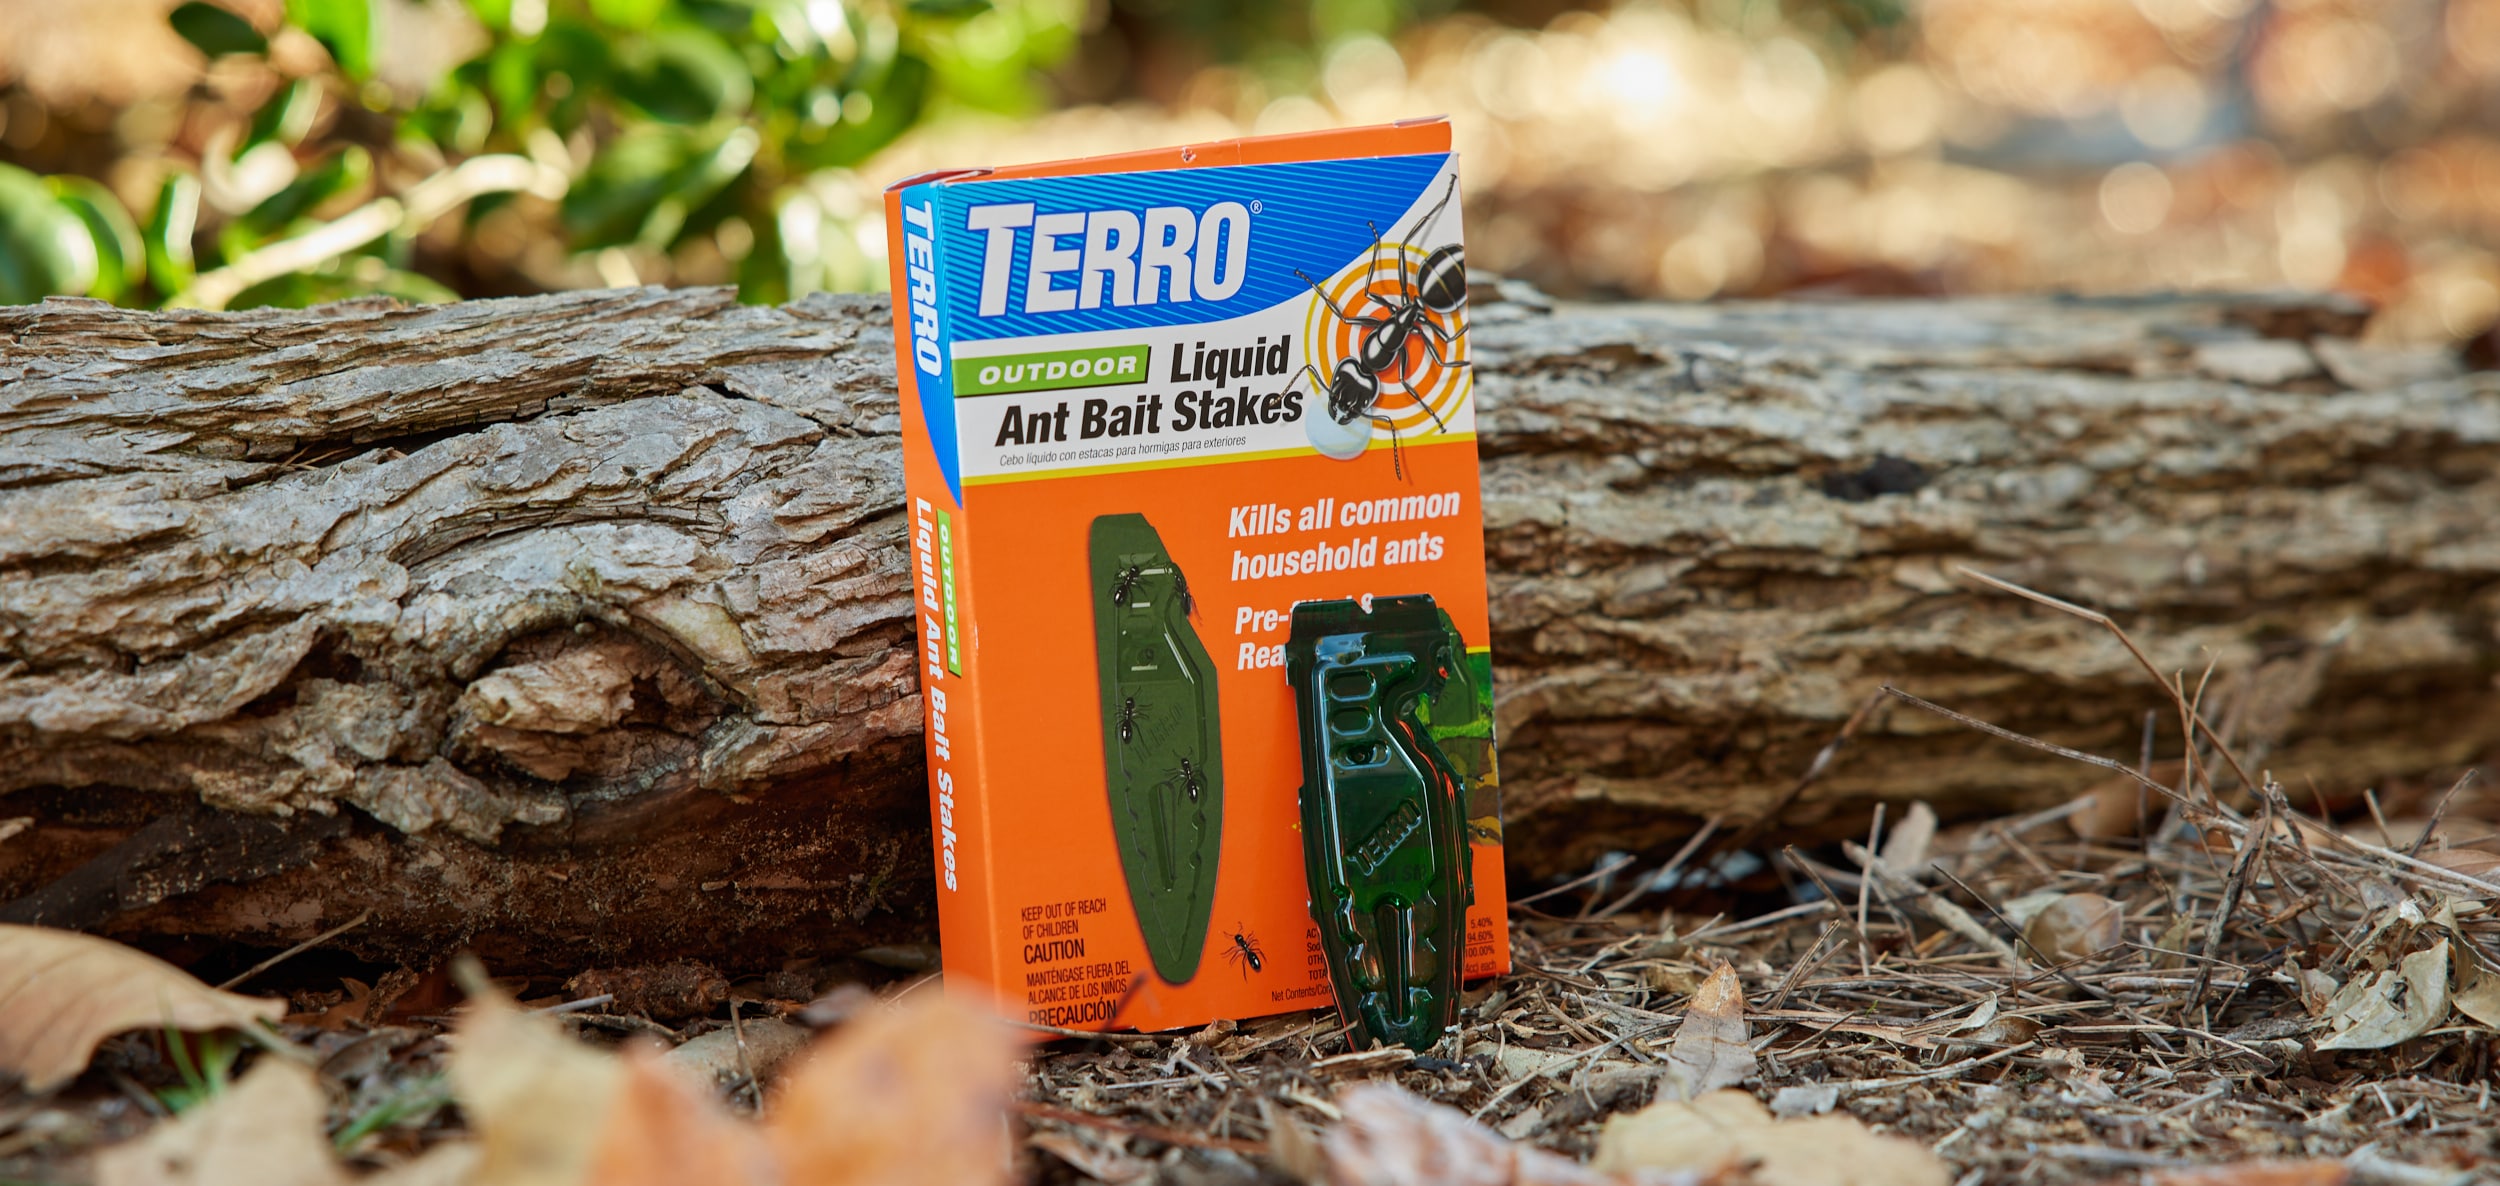 TERRO 1.4-fl oz Ant Bait Station Stakes in the Pesticides